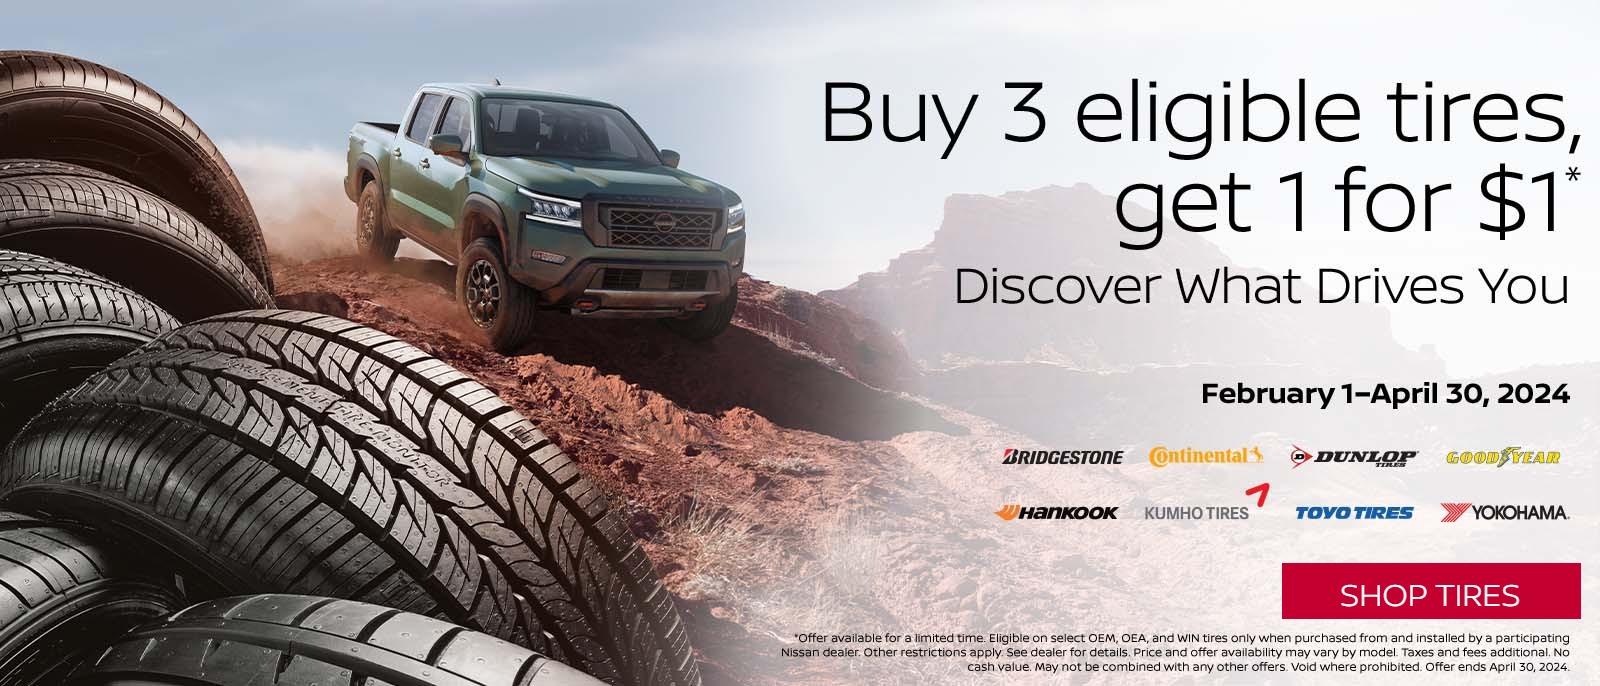 Buy 3 eligible tires get 1 for $1
Discover What Vrives You 
Febrary 1-april 30, 2024